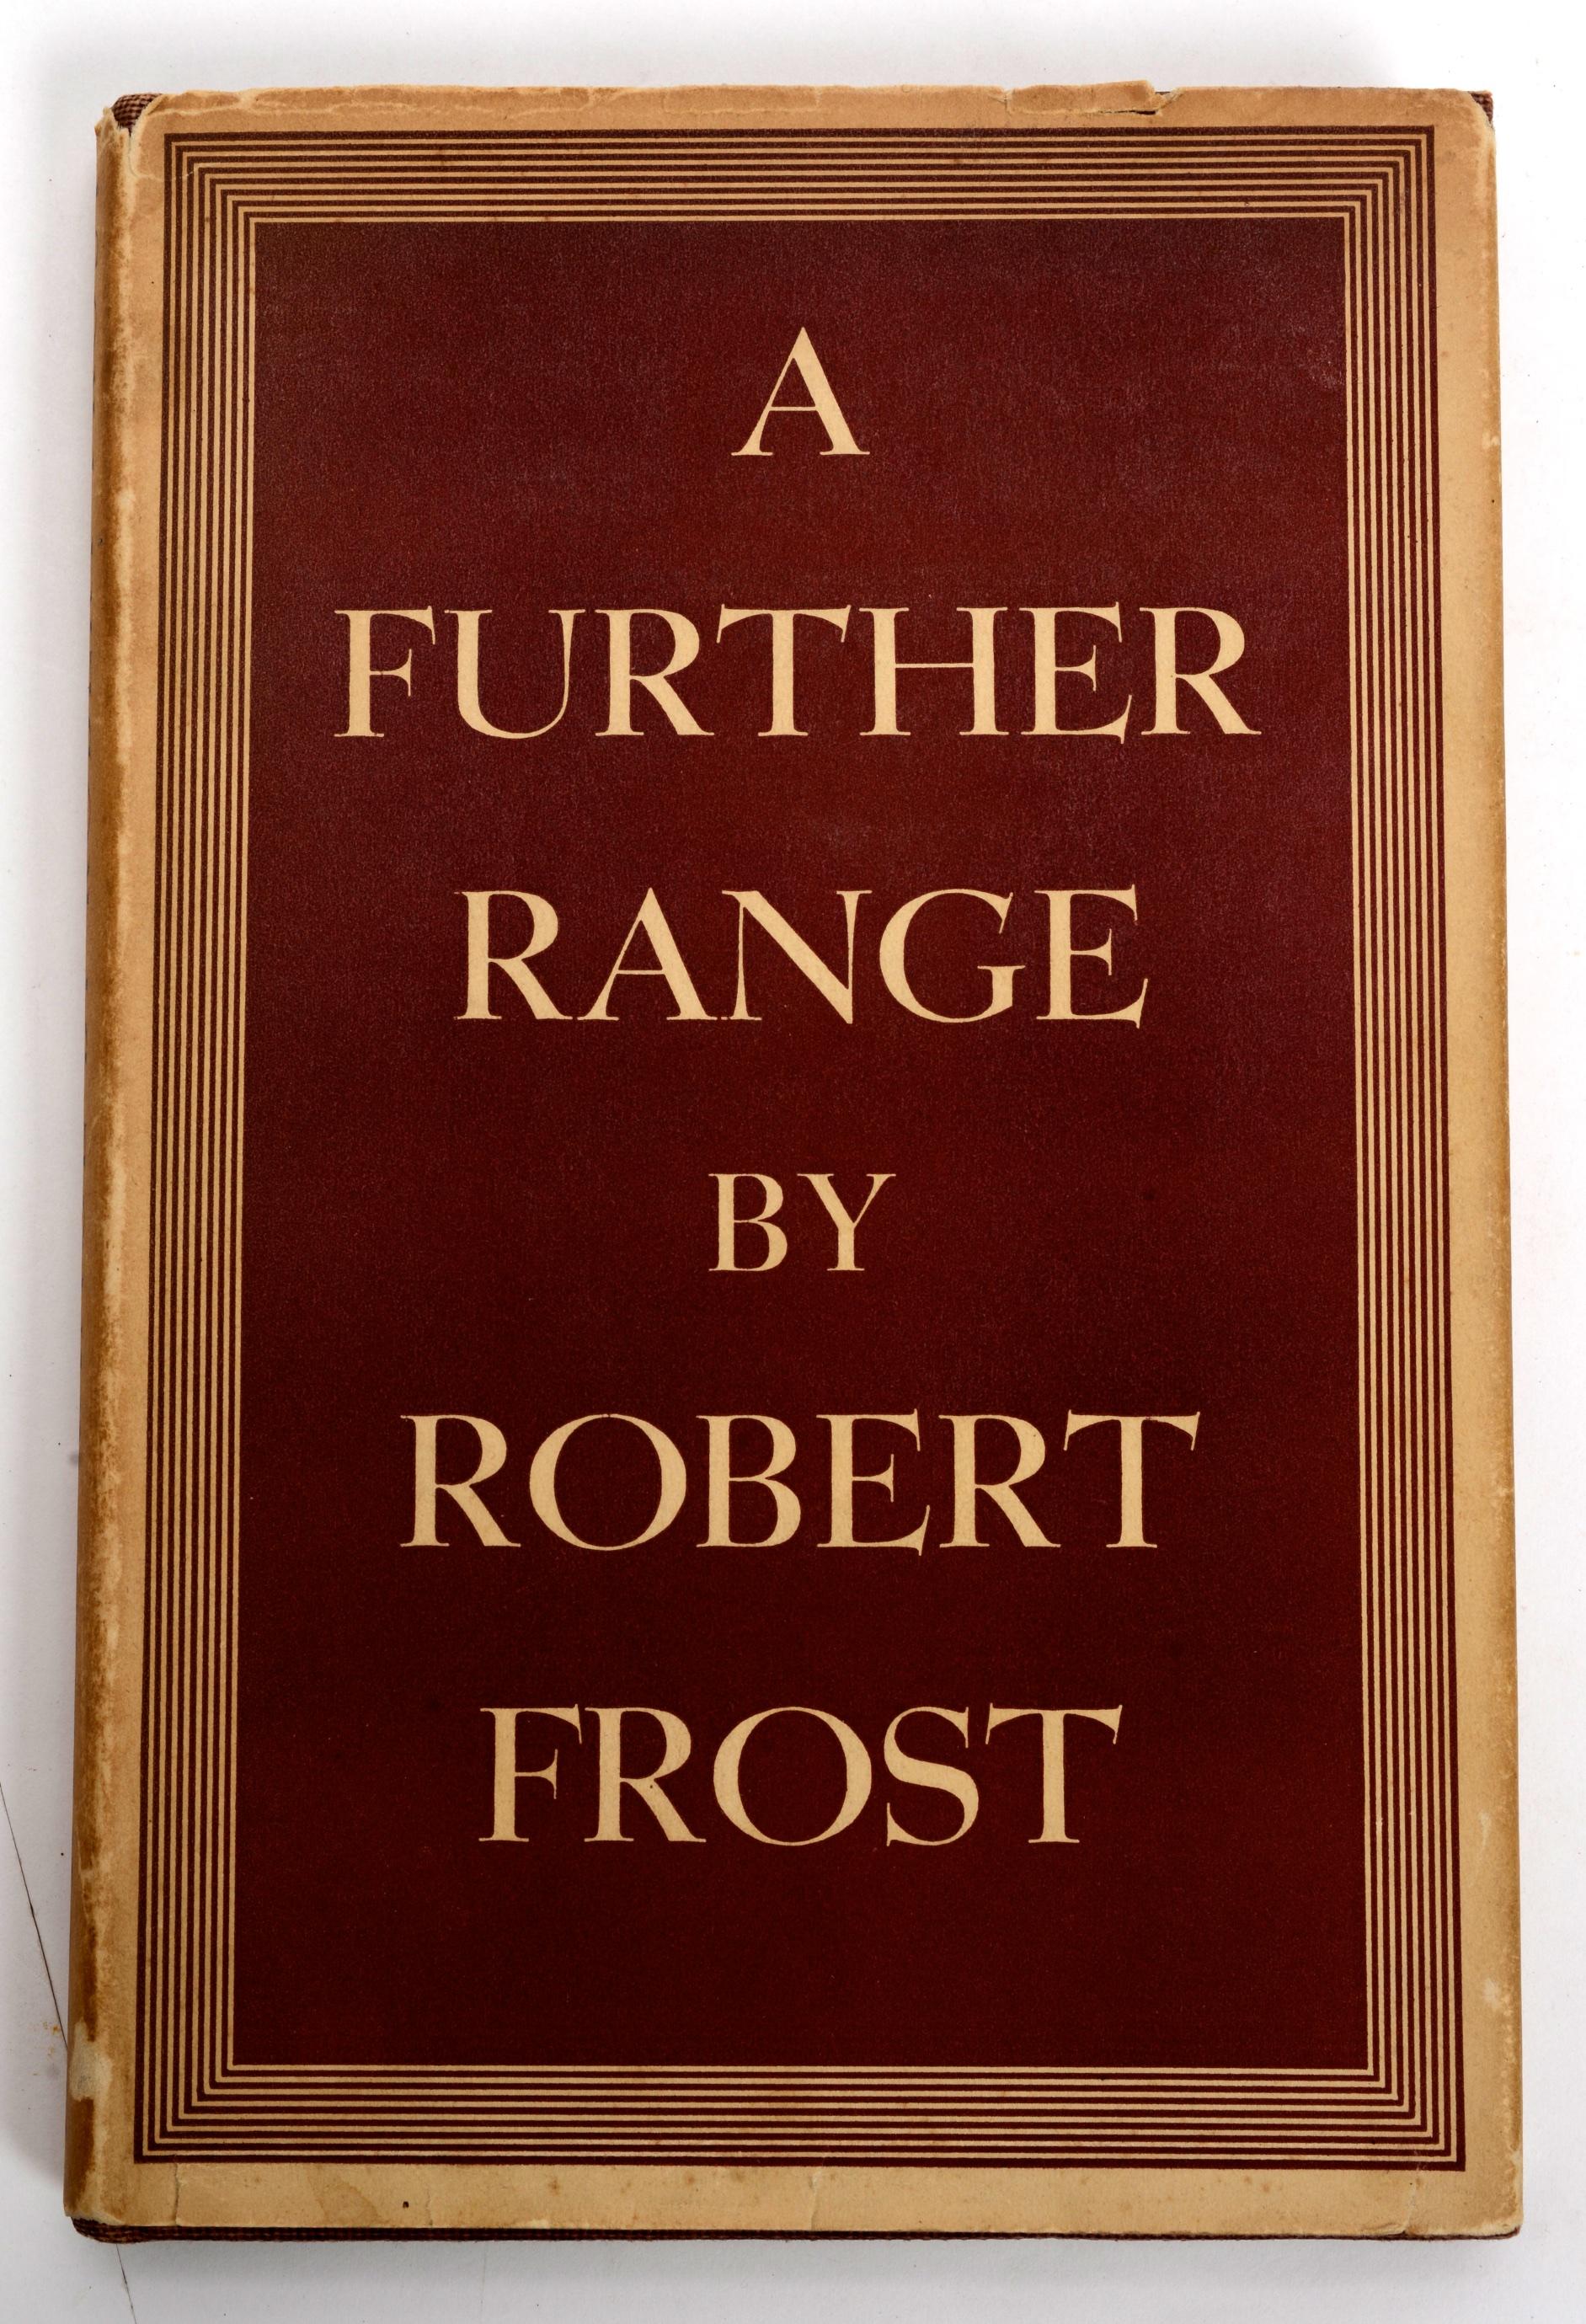 Pair of 1st Edition Poetry Books By Robert Frost 4